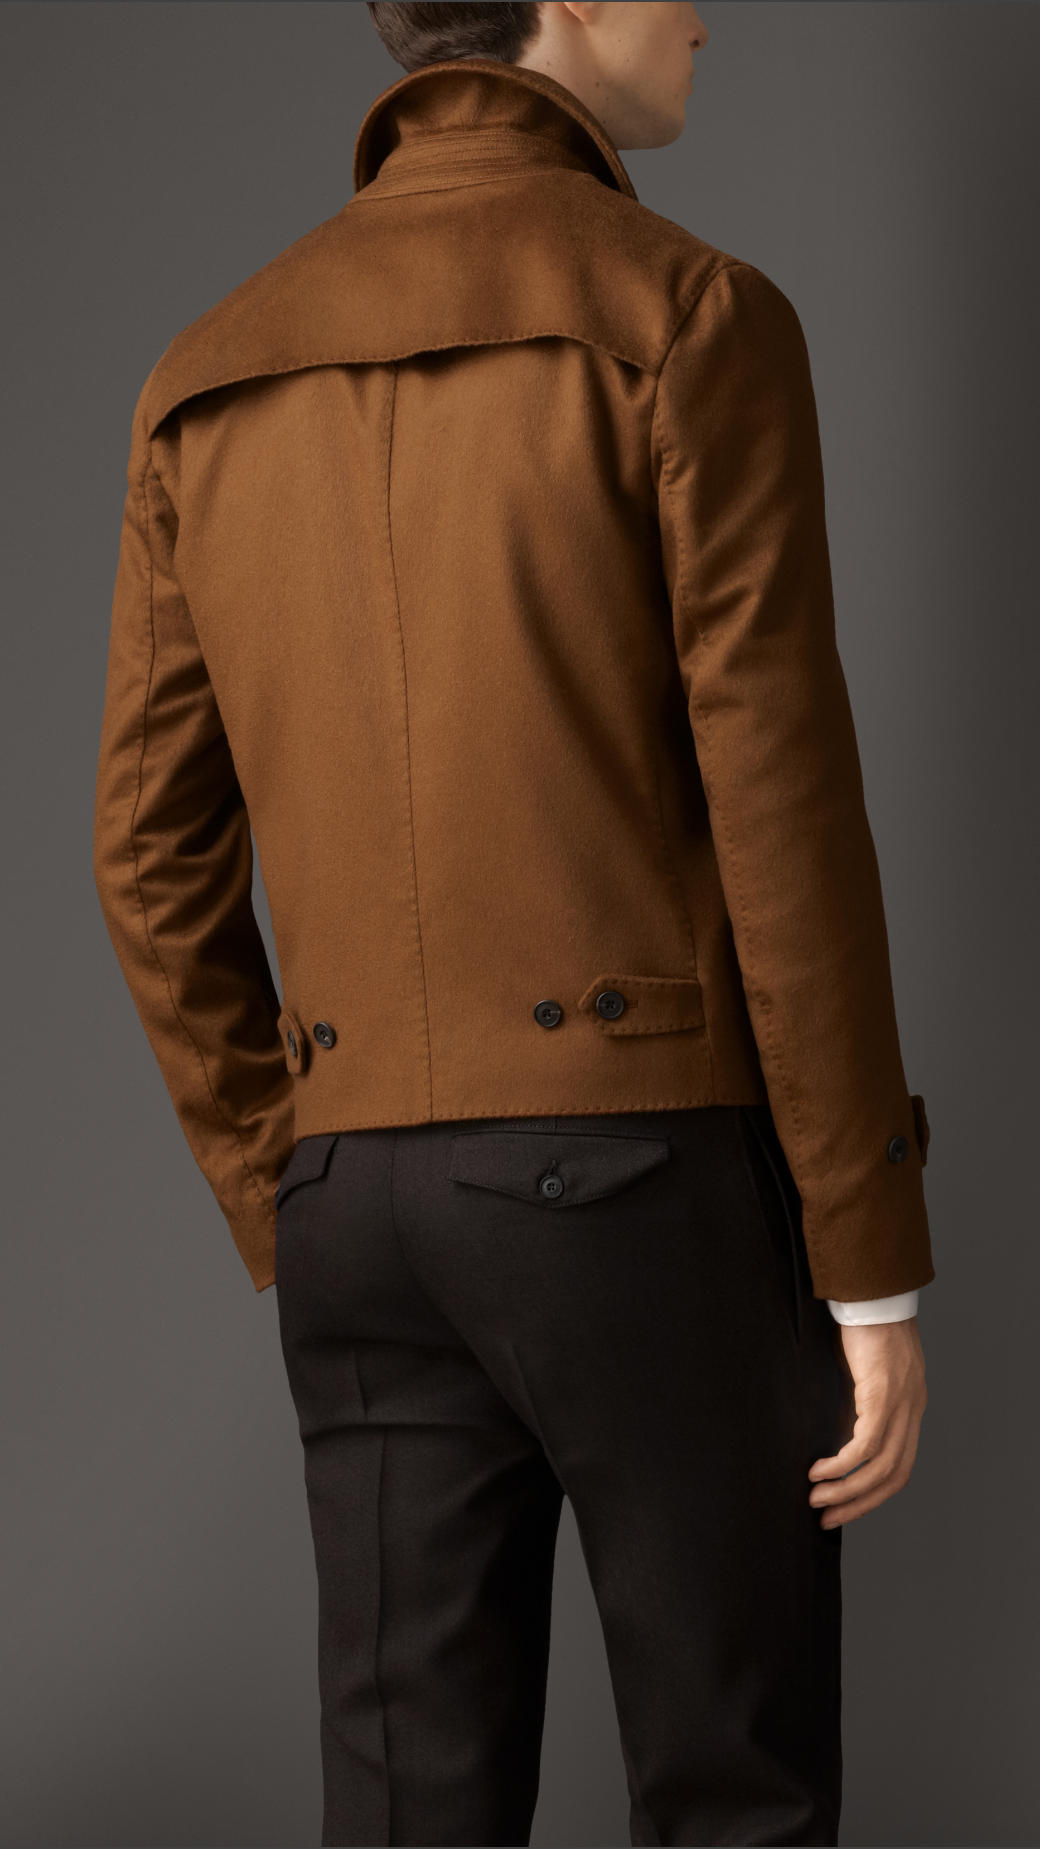 Burberry Cashmere Harrington Jacket in Toffee (Brown) for Men - Lyst